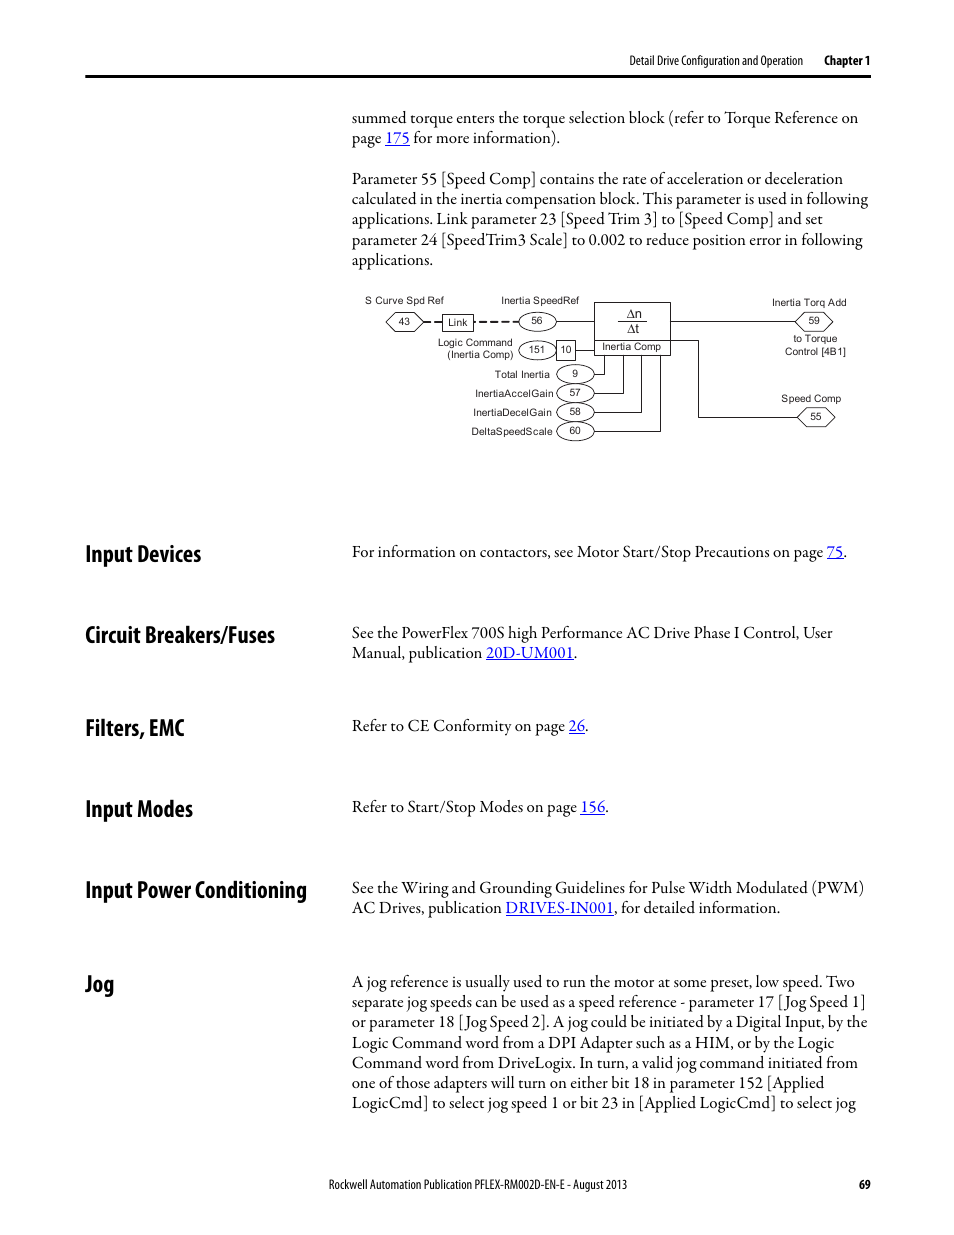 Input devices, Circuit breakers/fuses, Filters, emc | Input modes, Input power conditioning | Rockwell Automation 20D PowerFlex 700S with Phase I Control Reference Manual User Manual | Page 69 / 190